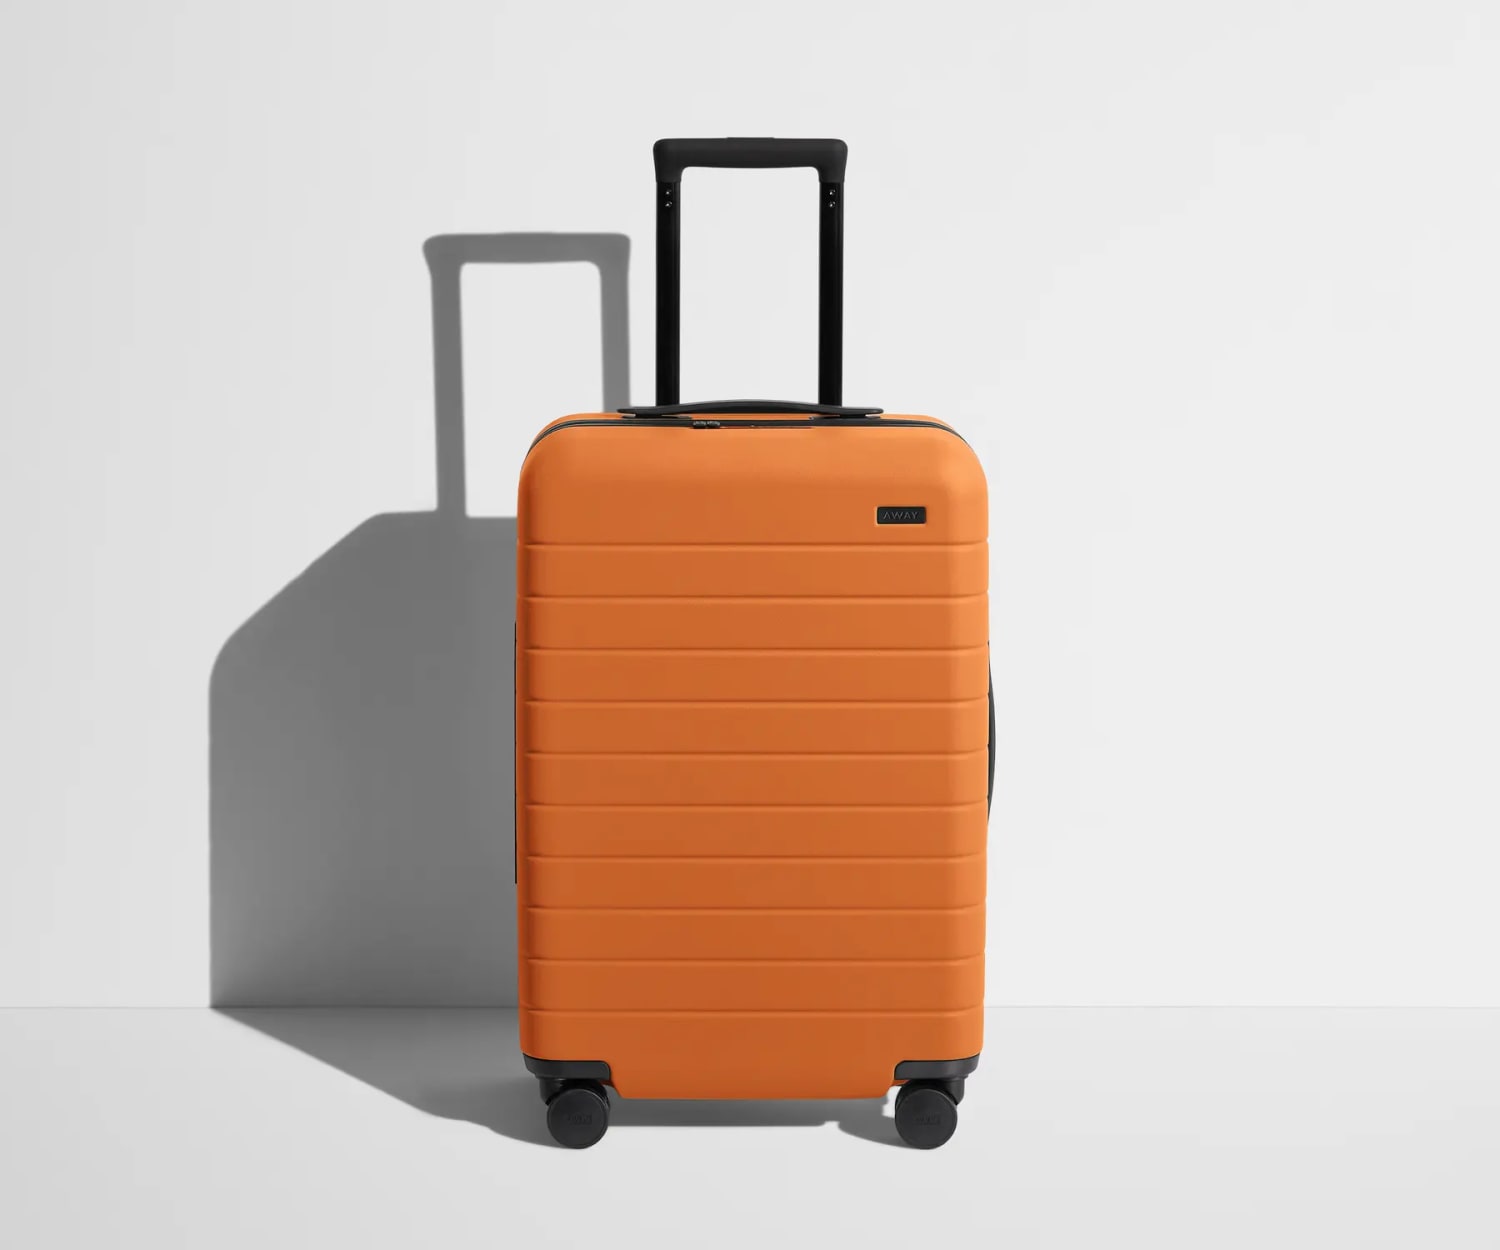 Away Luggage Just Launched a Waitlist-Worthy 'Sky' Color